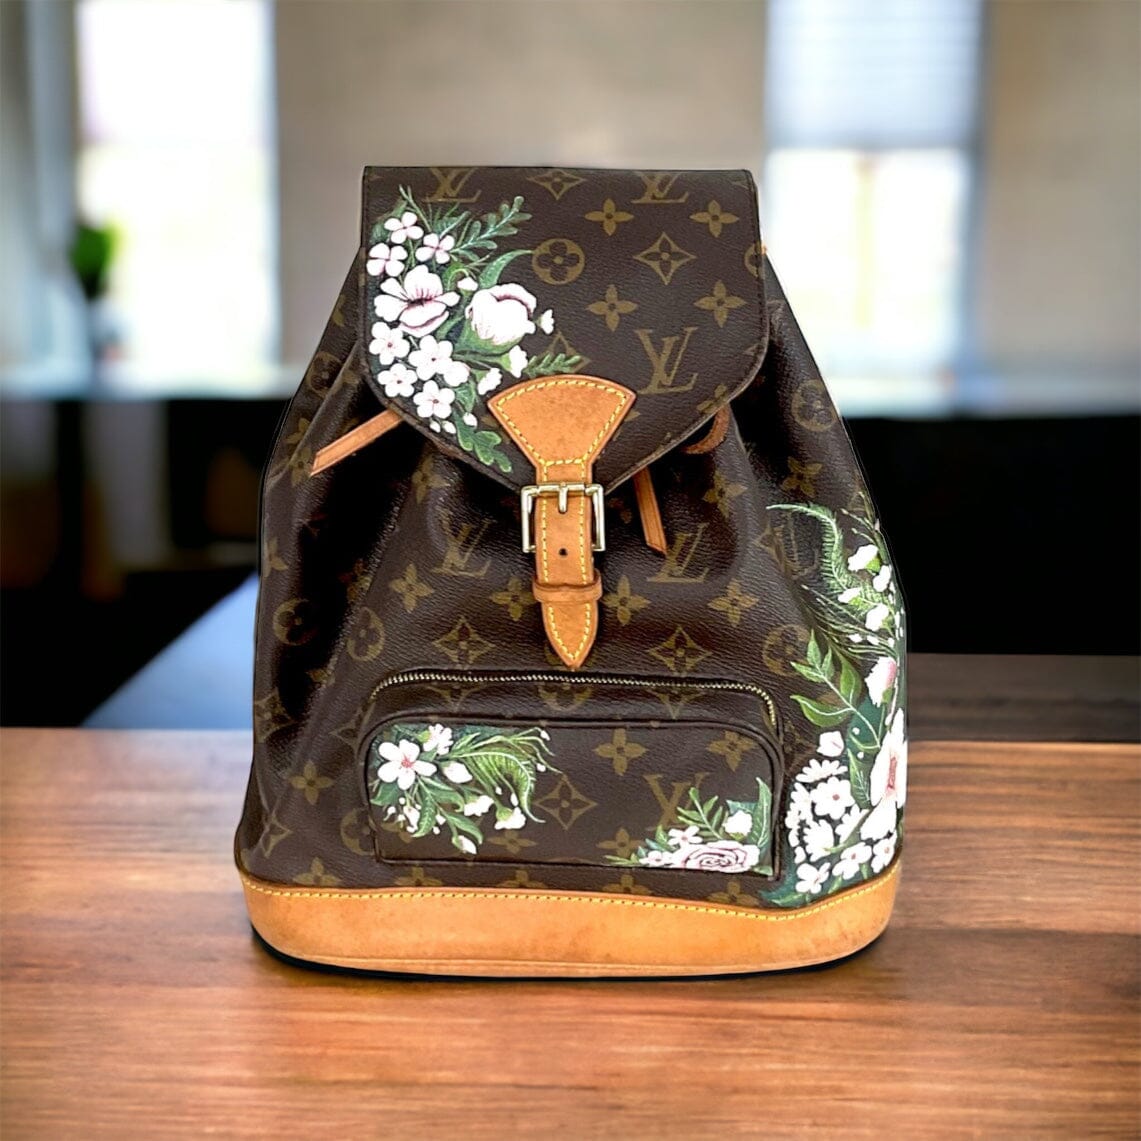 LOUIS VUITTON Monogram Montsouris MM Backpack - More Than You Can